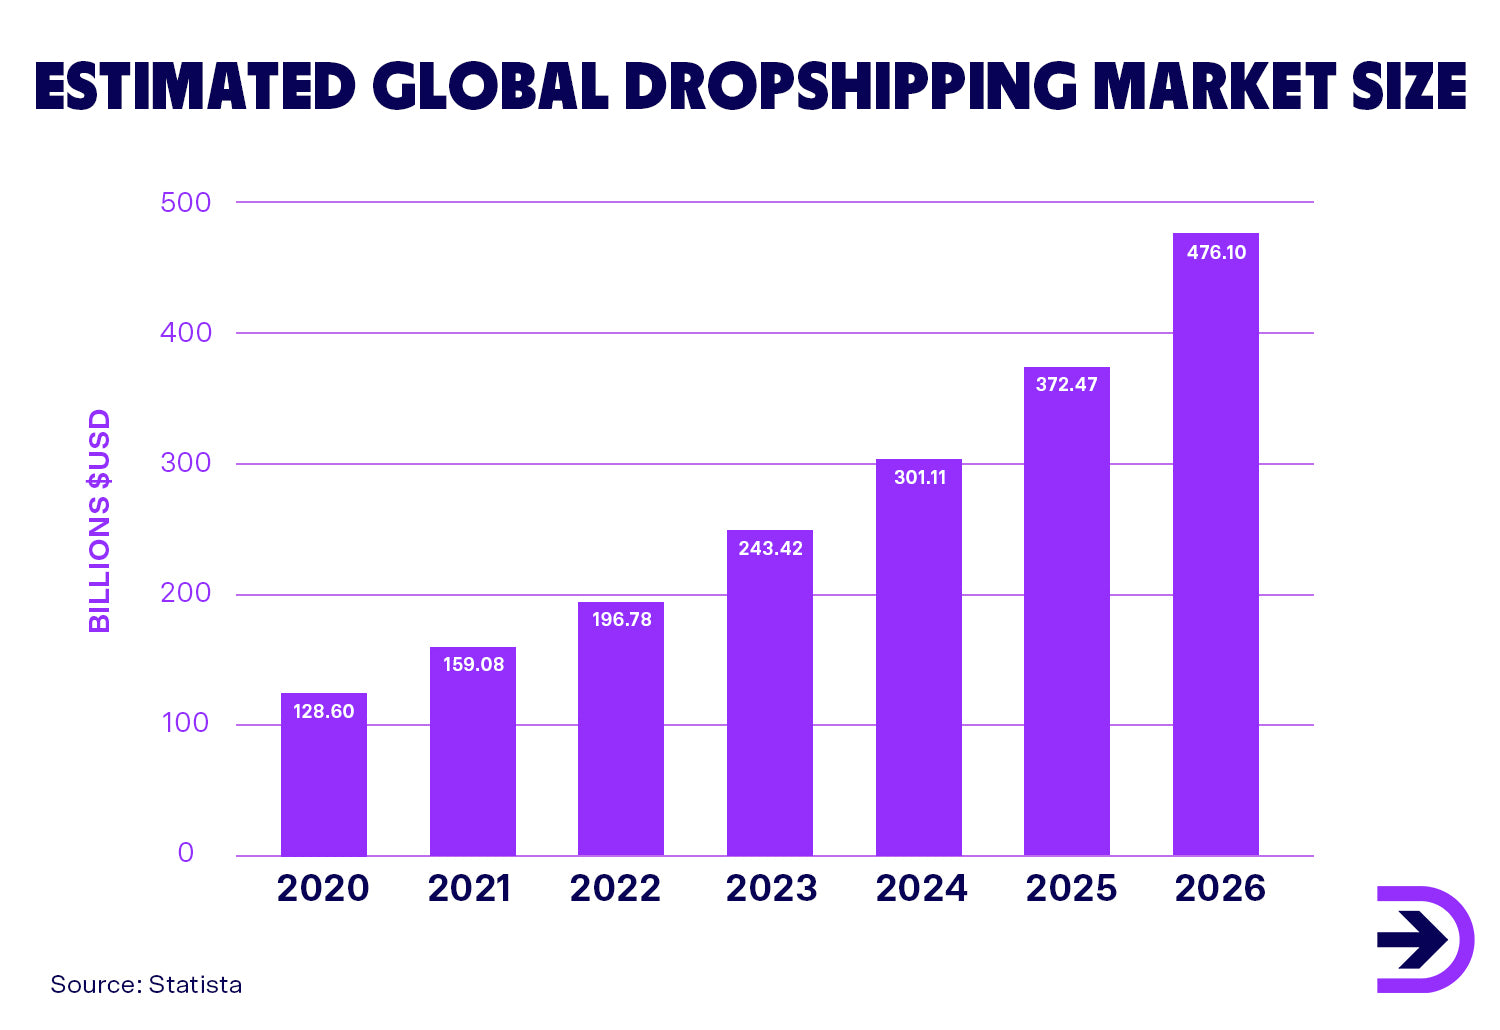 The global dropshipping market size is estimated to reach $476 billion in 2026.